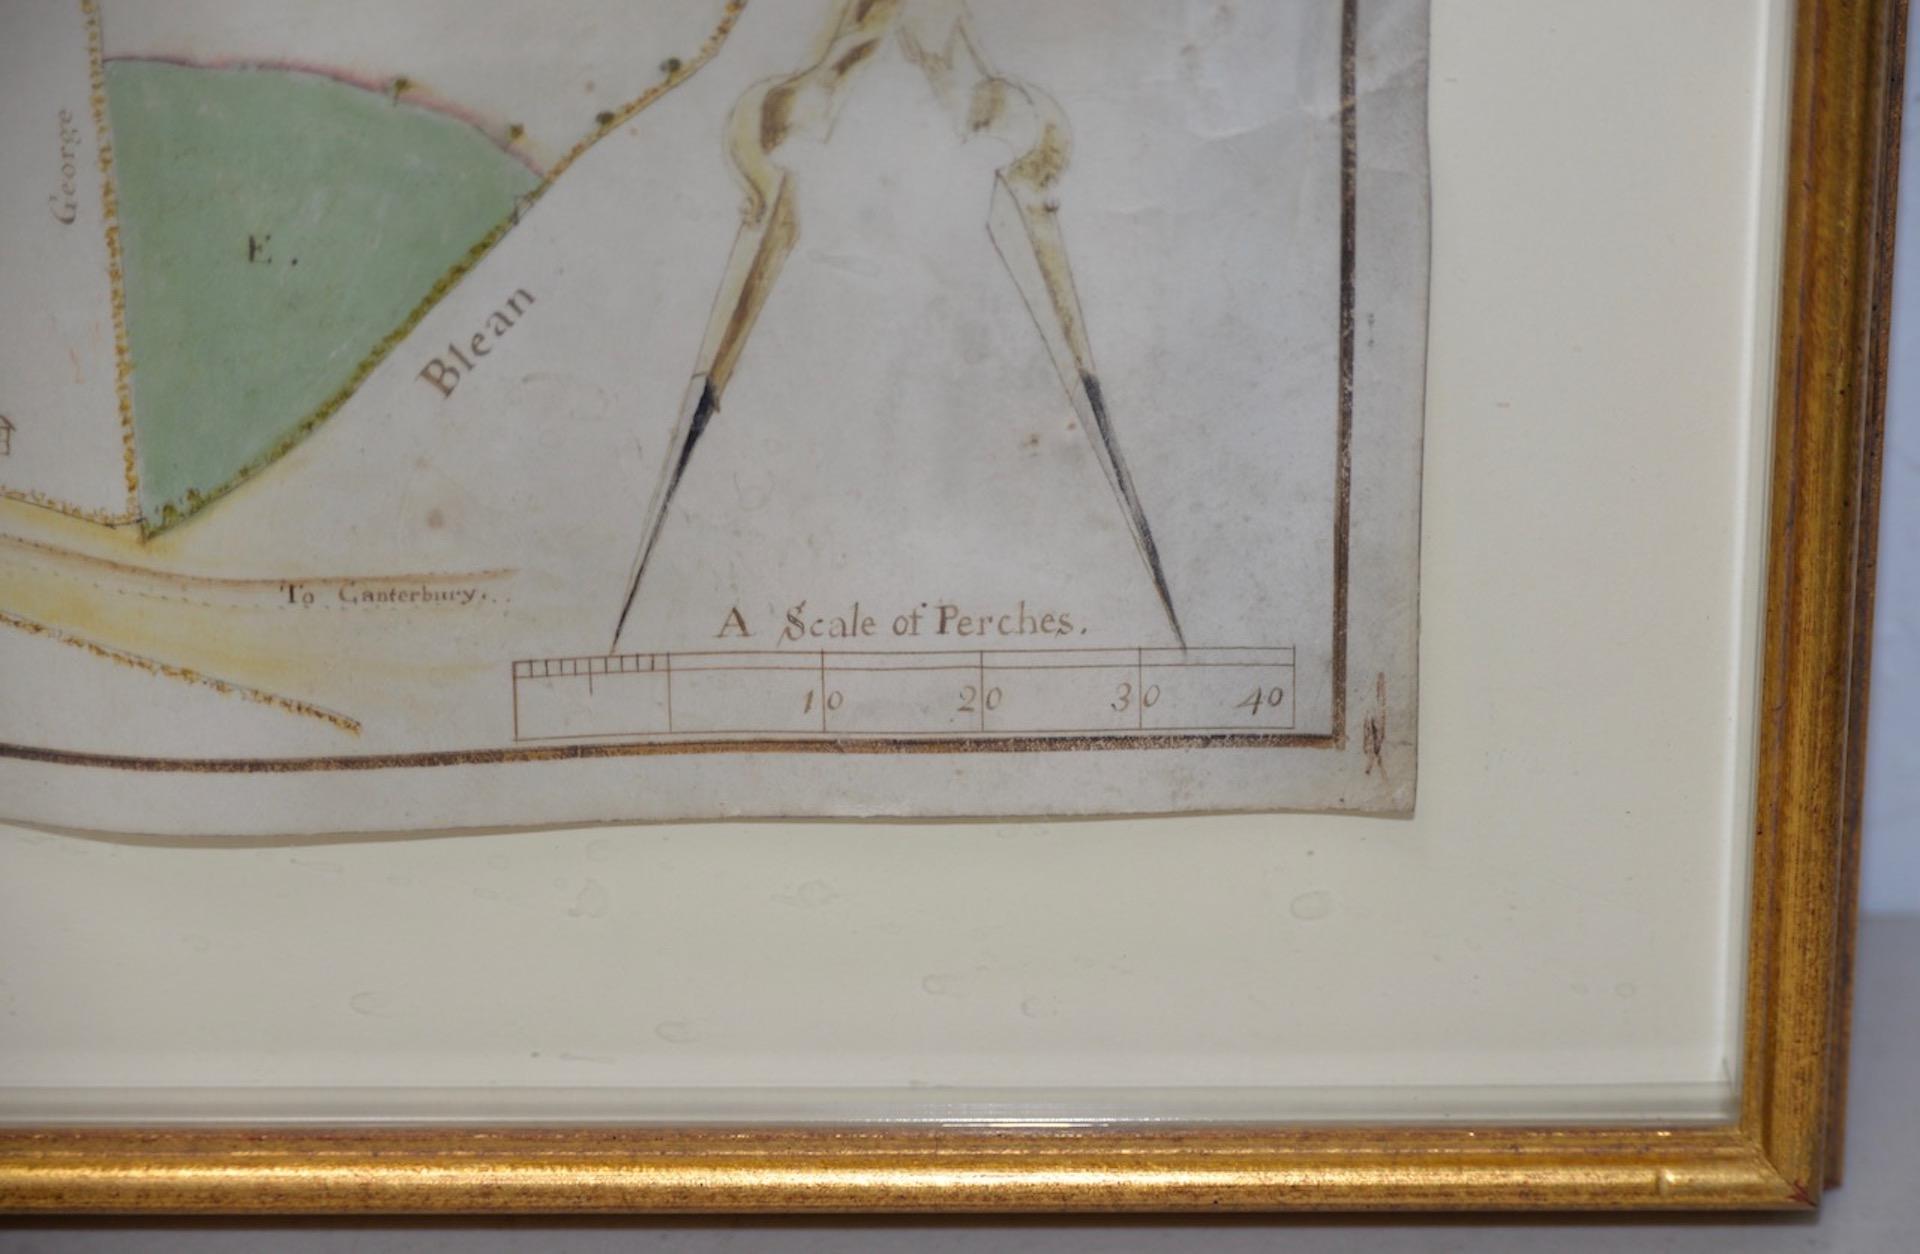 Mid-18th century hand drawn English farm map on Vellum circa 1740s

Henry Maxted & Isaac Terry, Surveyors.

A Map of a Farm in the Parish of Blean in the County of KENT: Belonging to Mrs Elizabeth Hodgson circa 1743.

A beautiful hand drawn